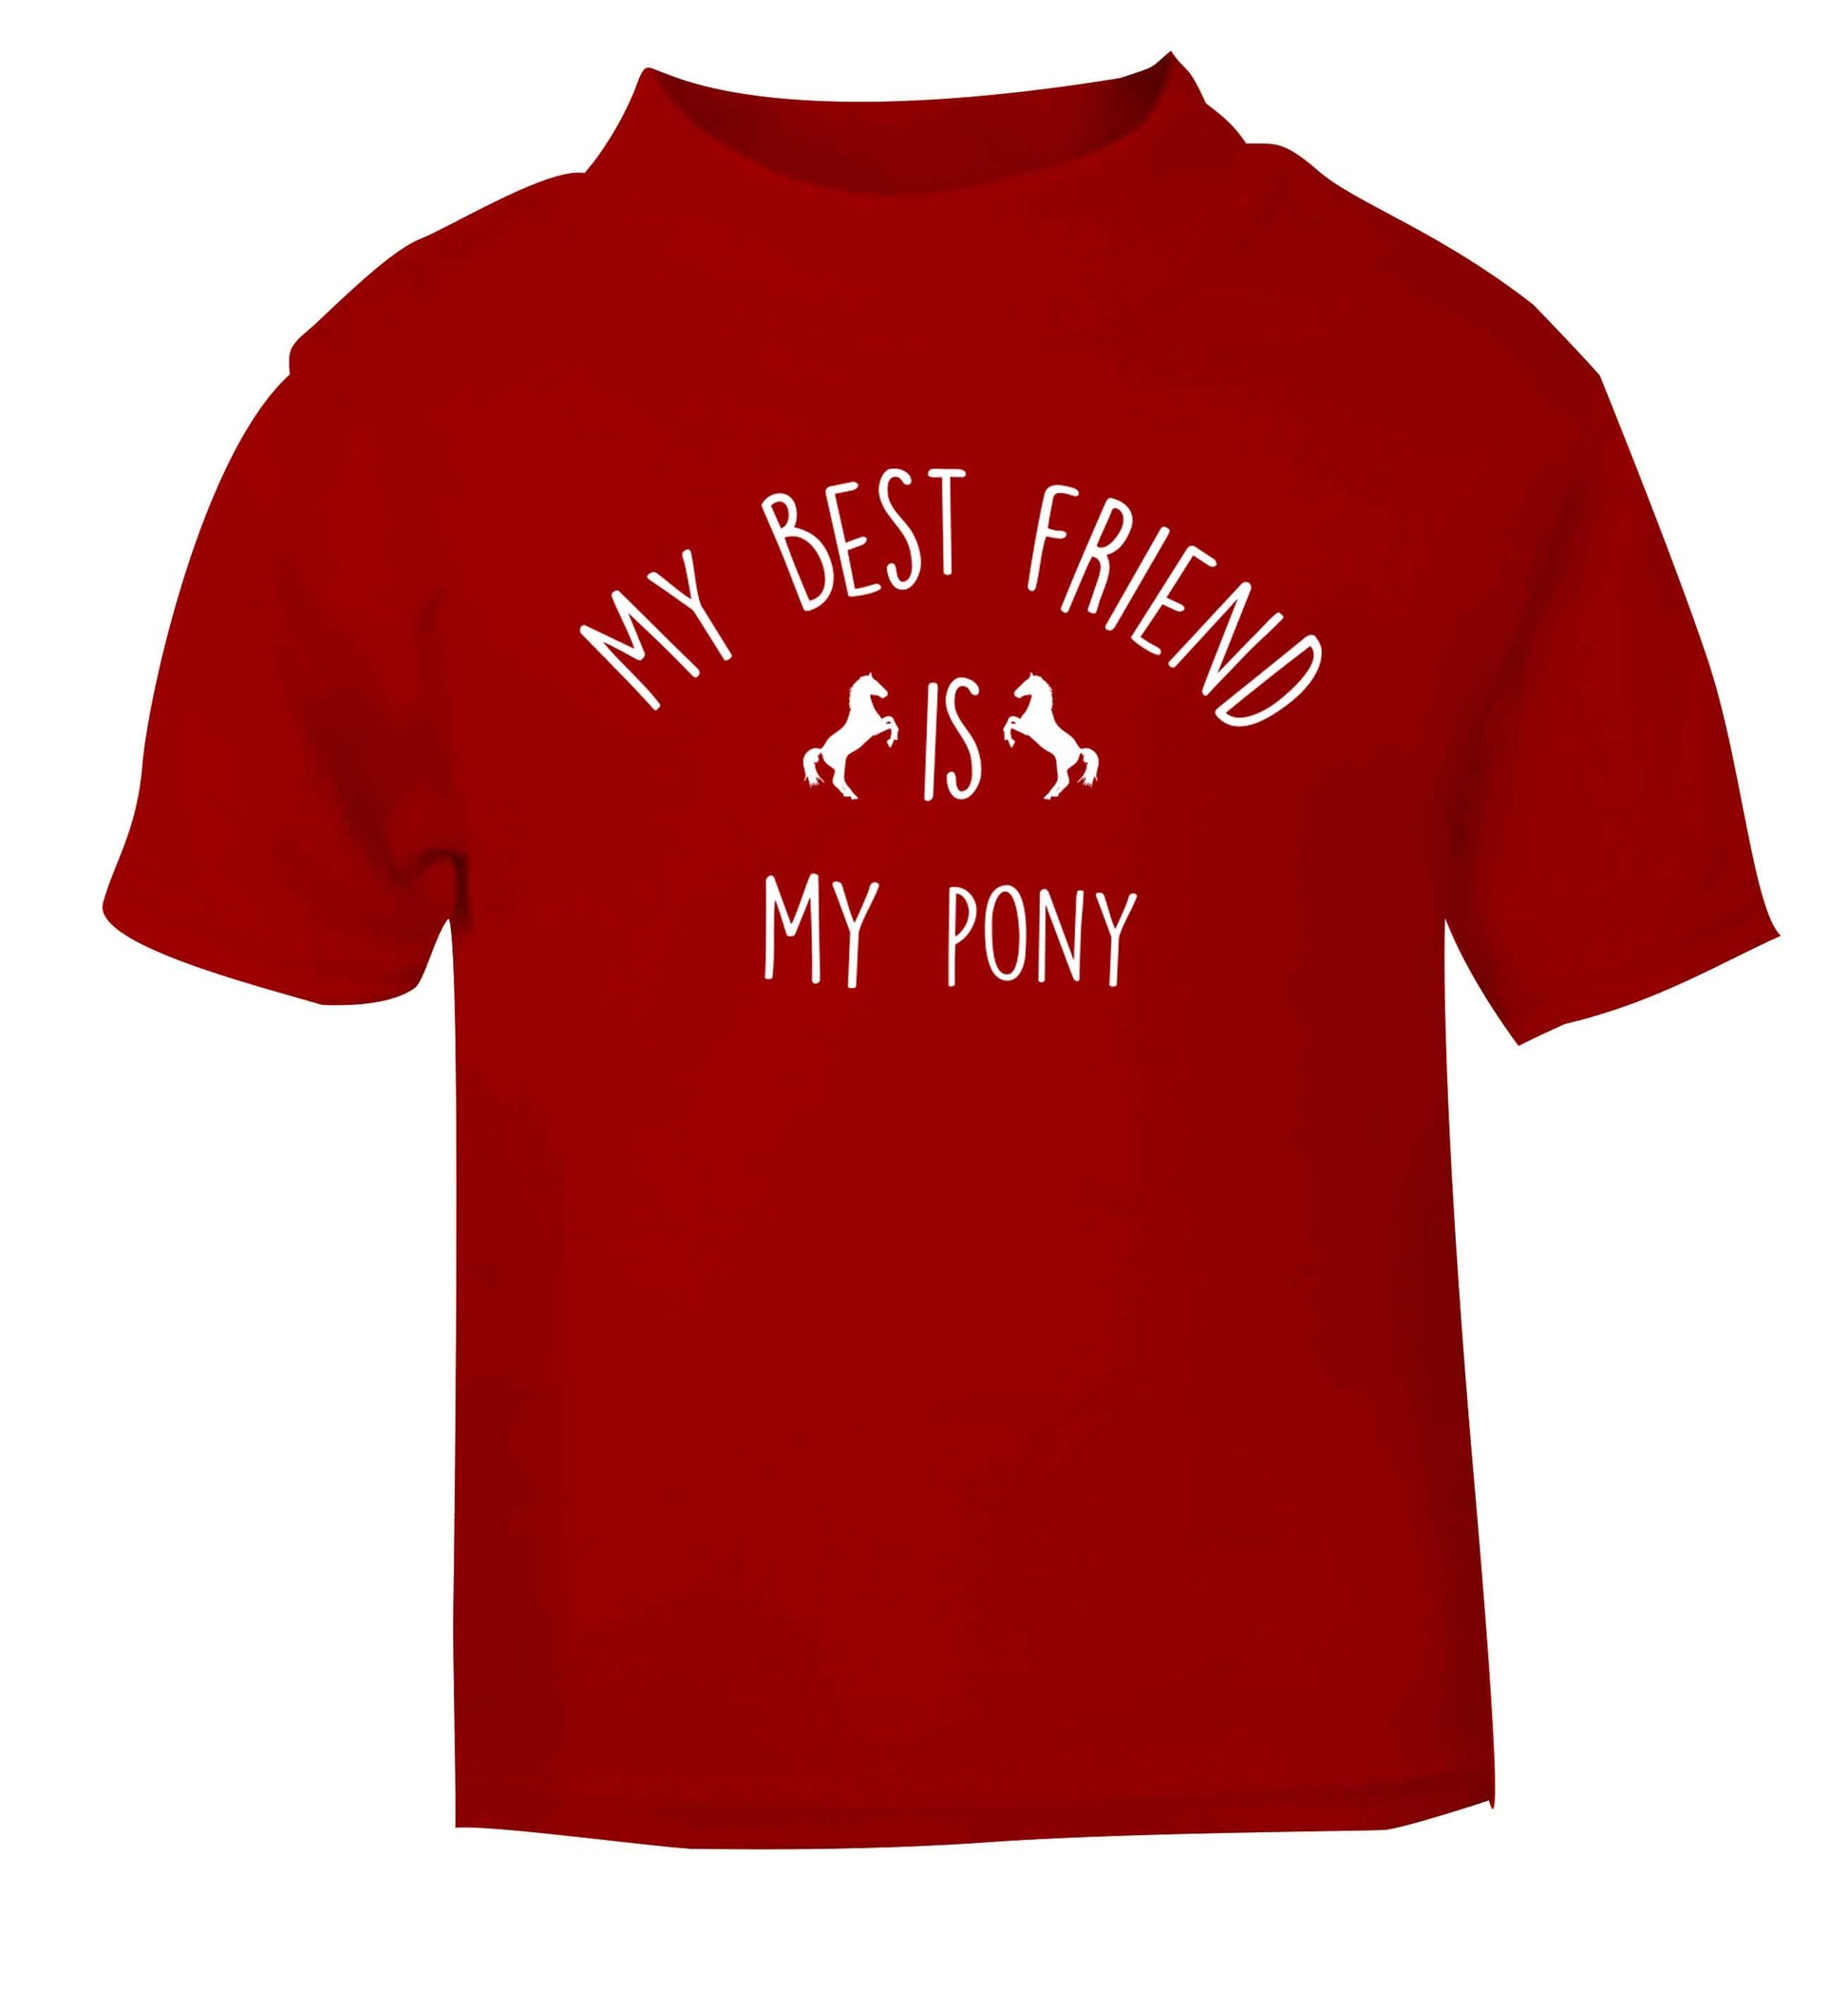 My best friend is my pony red baby toddler Tshirt 2 Years